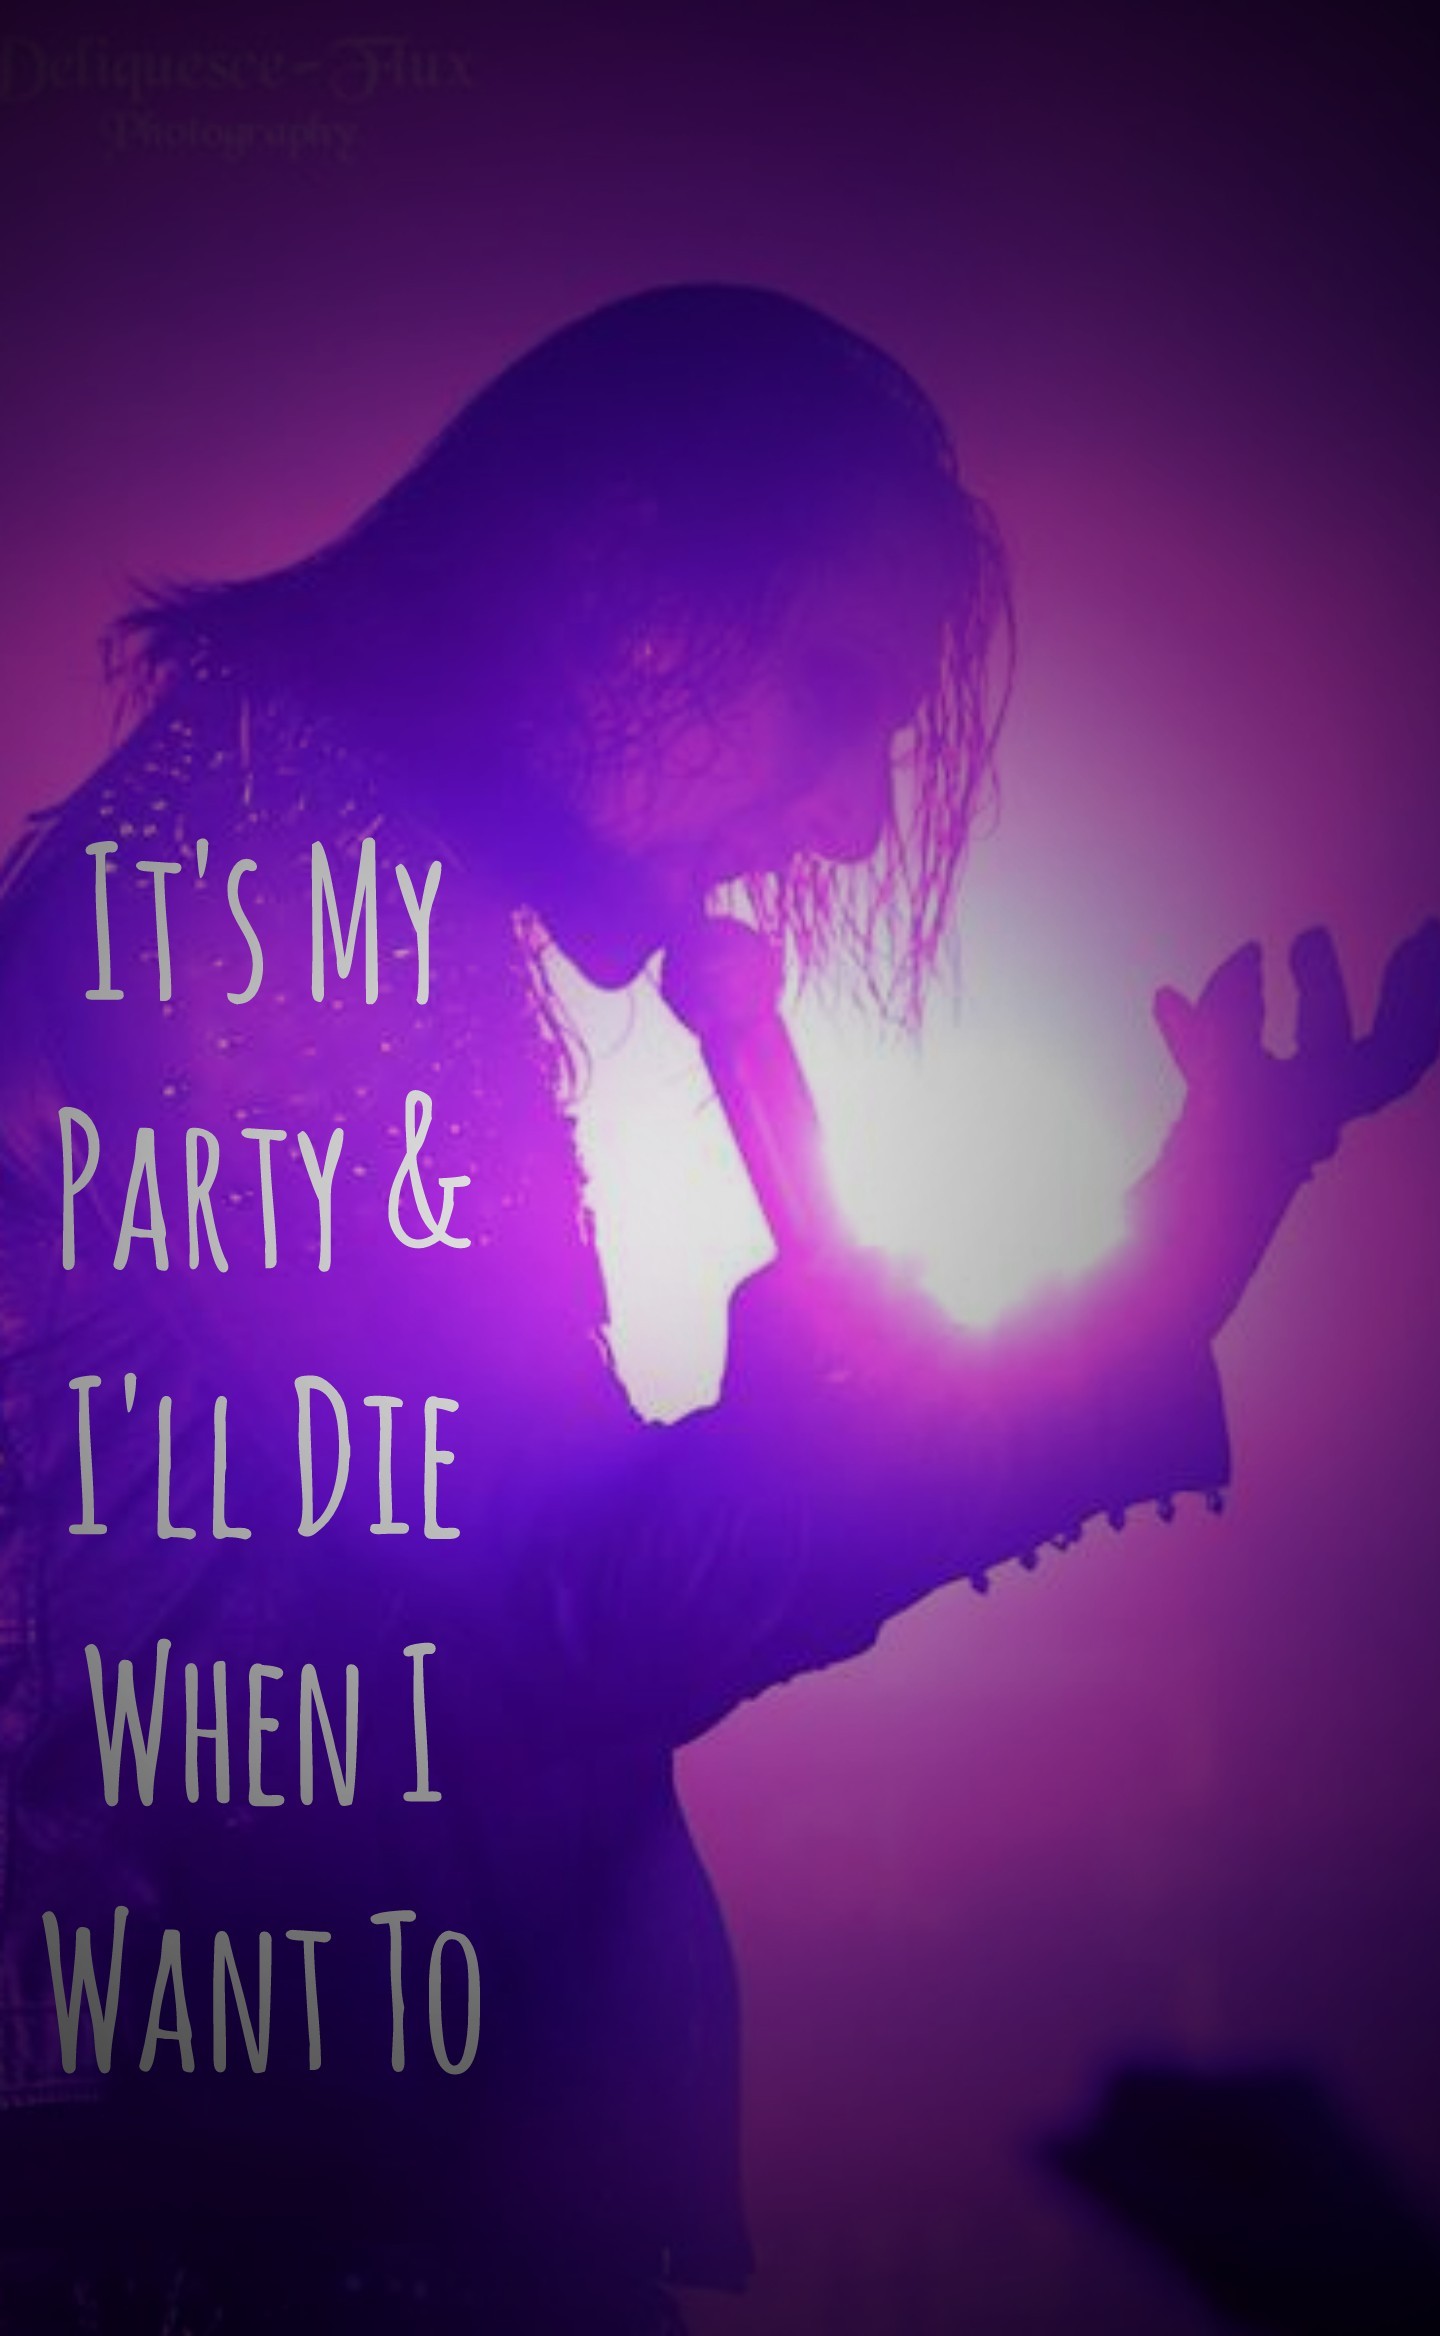 It's My
Party &
I'll Die
When I
Want To